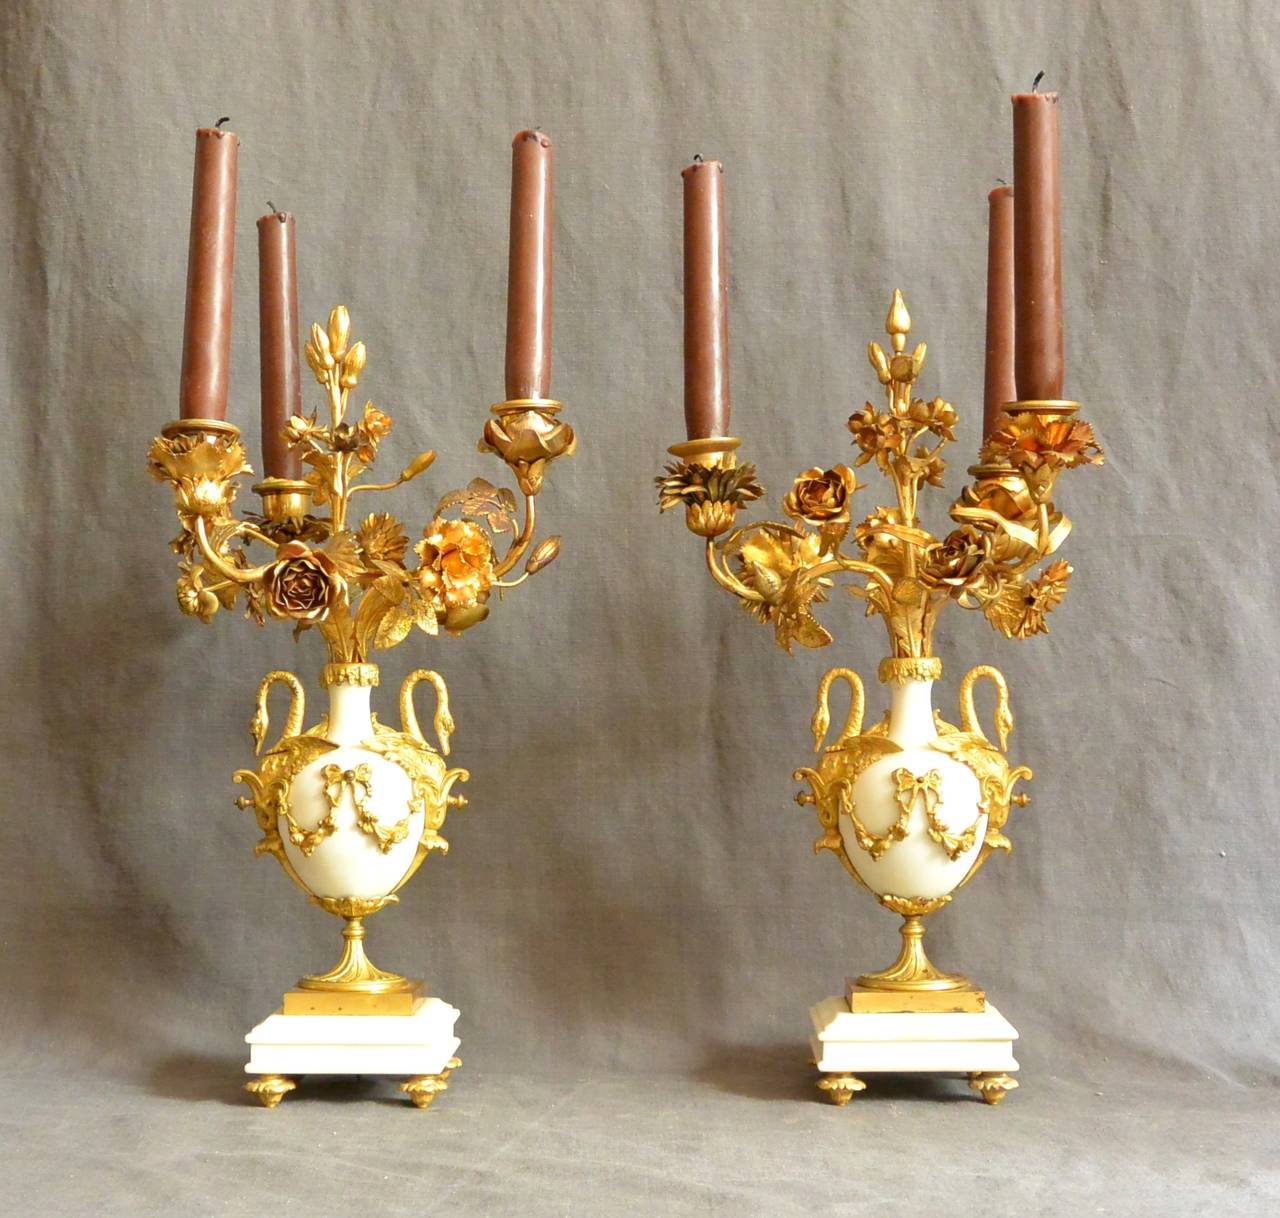 Pair of Louis XV style candelabra.  Pair gilt-metal and white marble Louis XV-style three-arm candelabra in the form of swan- handled urns issuing gilt-metal flowers and three-candle sockets on low plinth bases with gilt metal feet.  Continental,